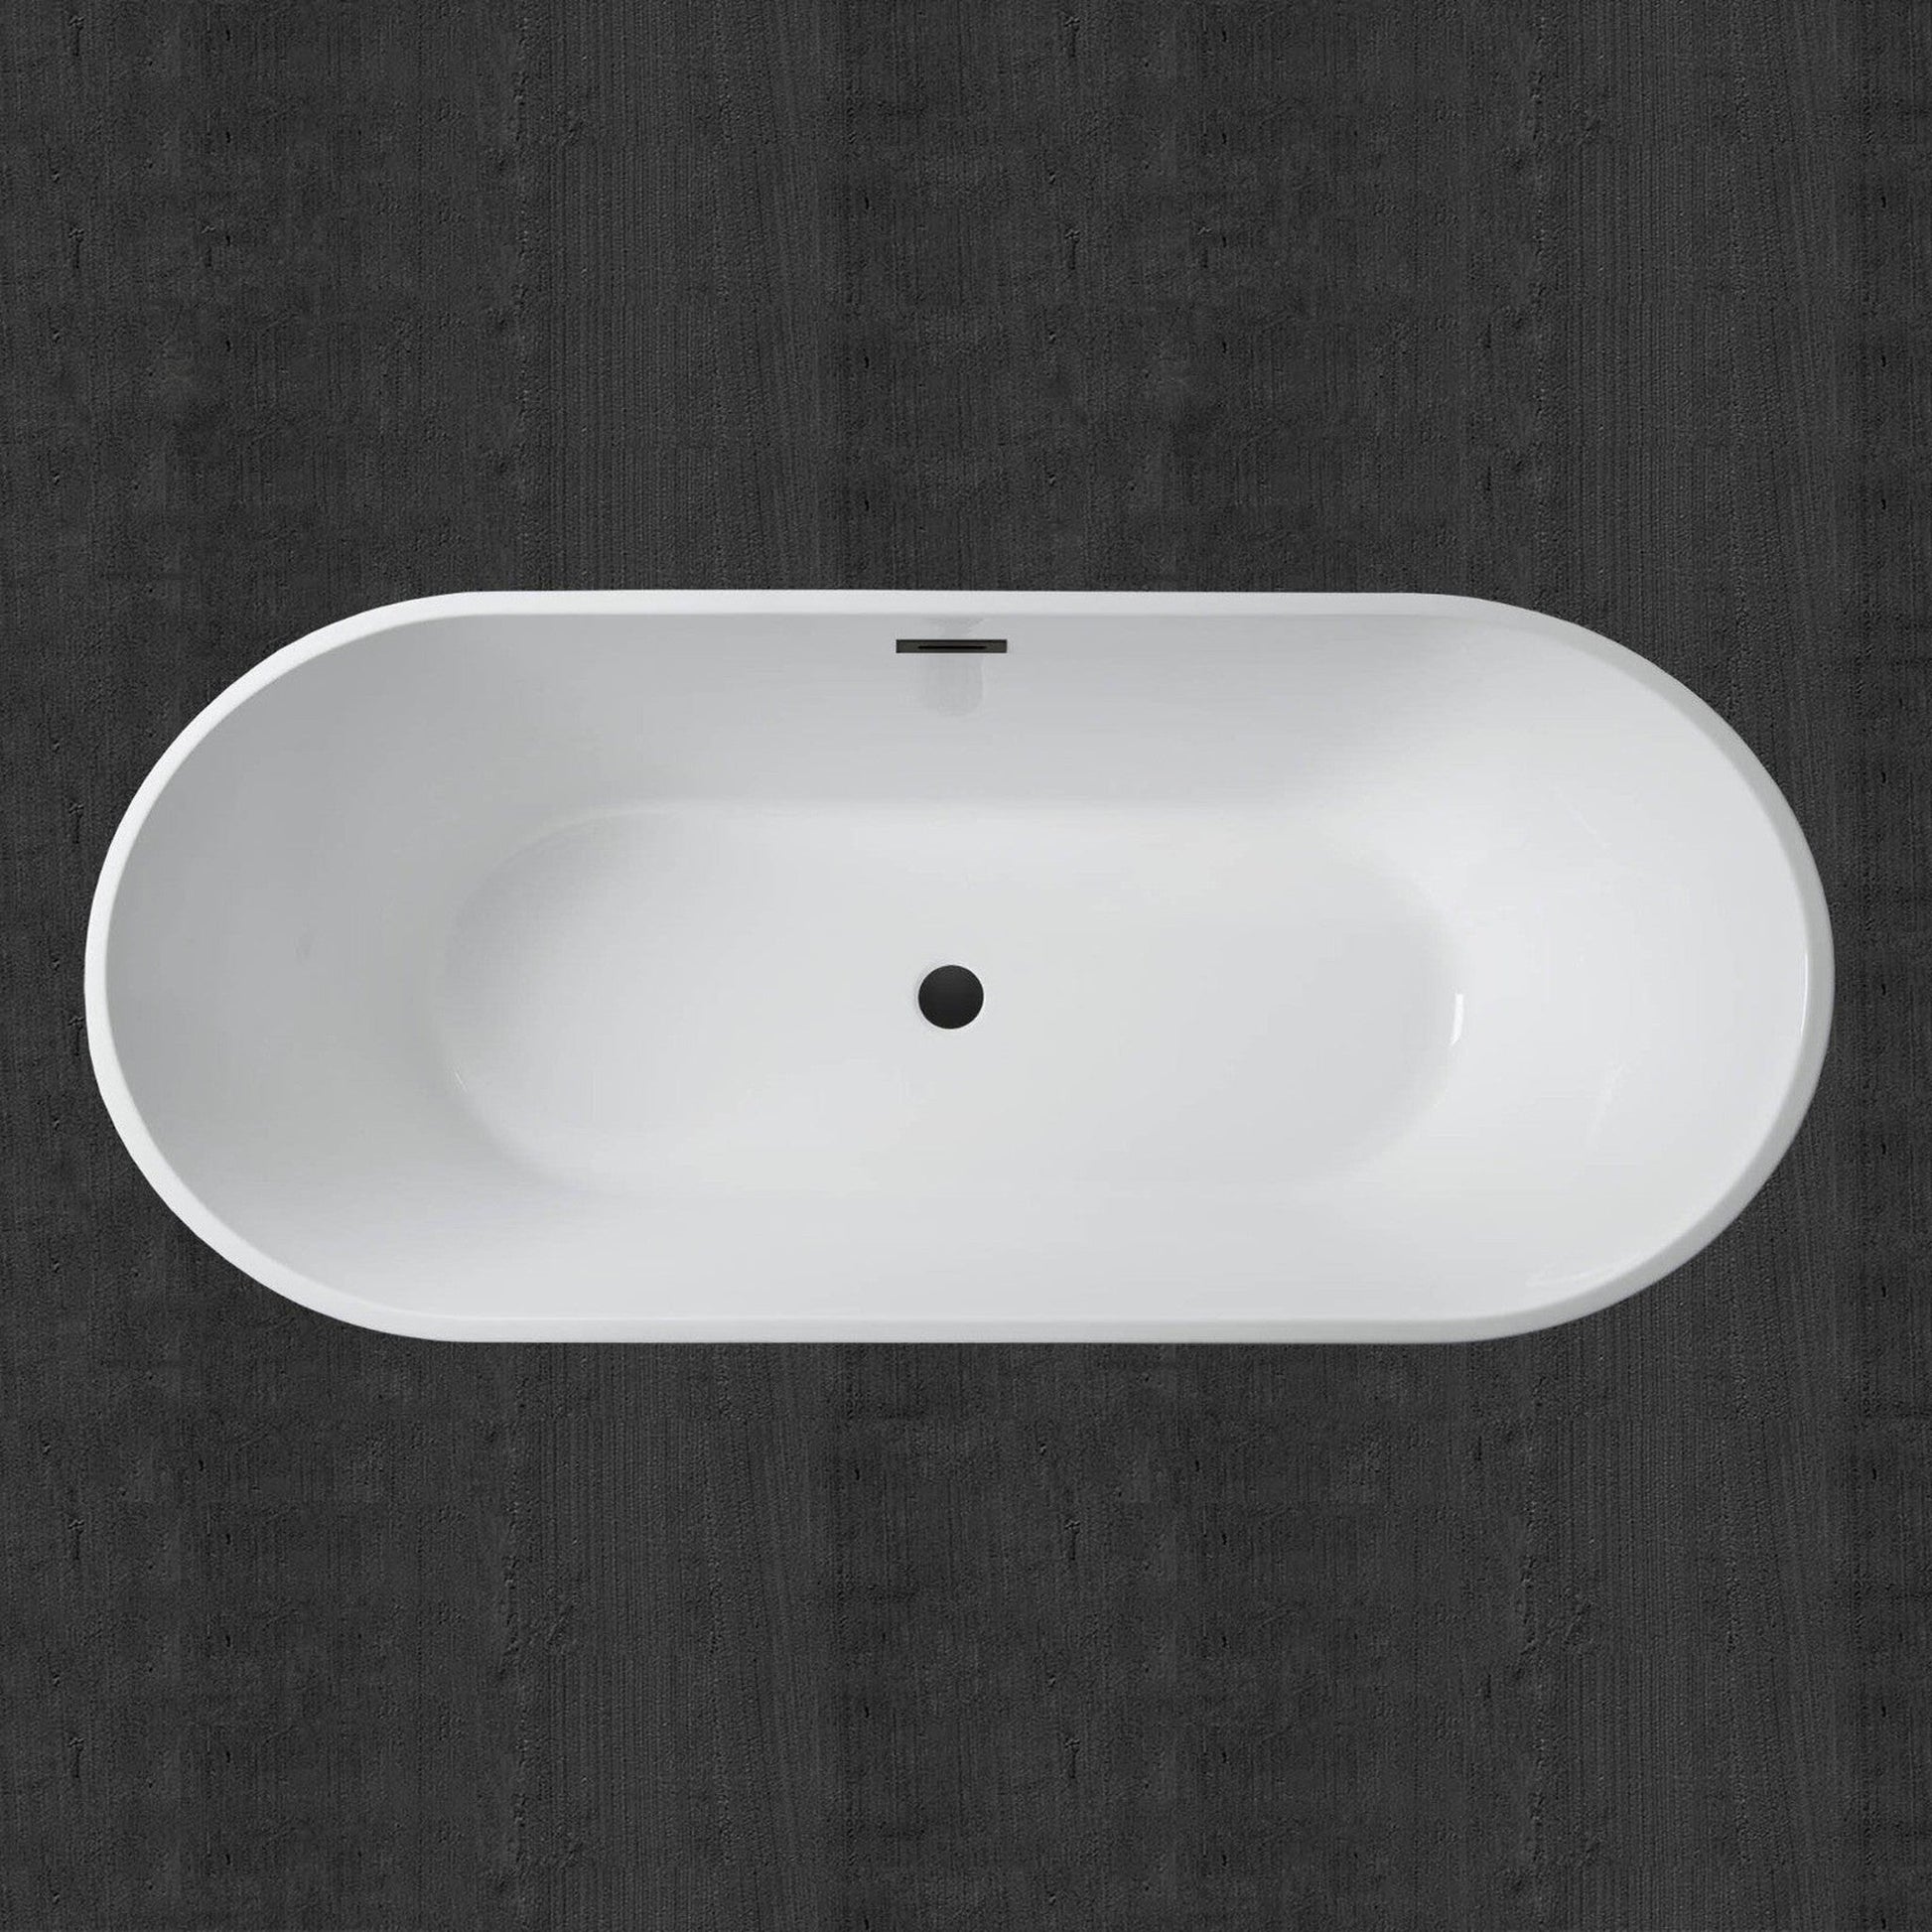 WoodBridge 71" White Acrylic Freestanding Contemporary Soaking Bathtub With Matte Black Drain, Overflow, F0006MBSQ Tub Filler and Caddy Tray